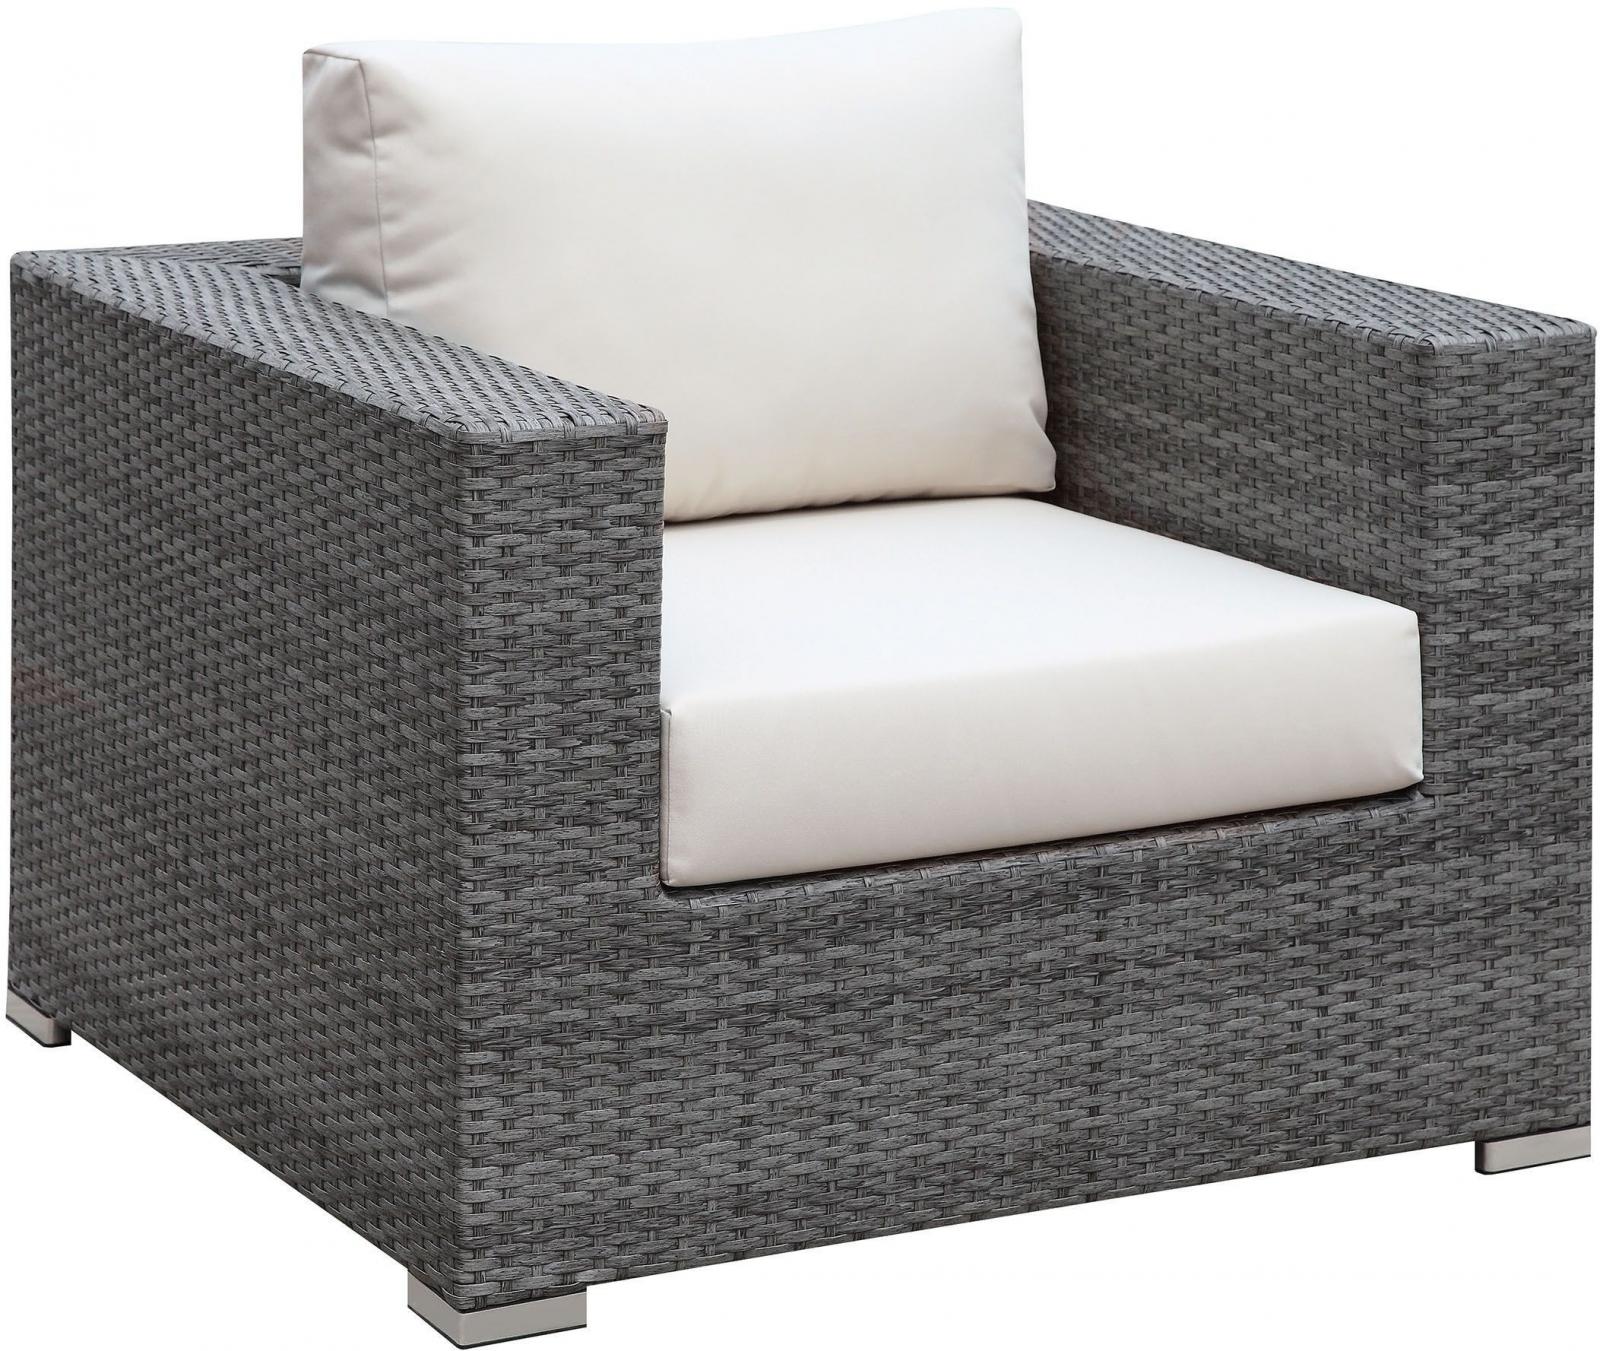 Patio Lounge Chairs W/ 2 Ottomans and End Table Set Furniture of America Somani - image 2 of 4